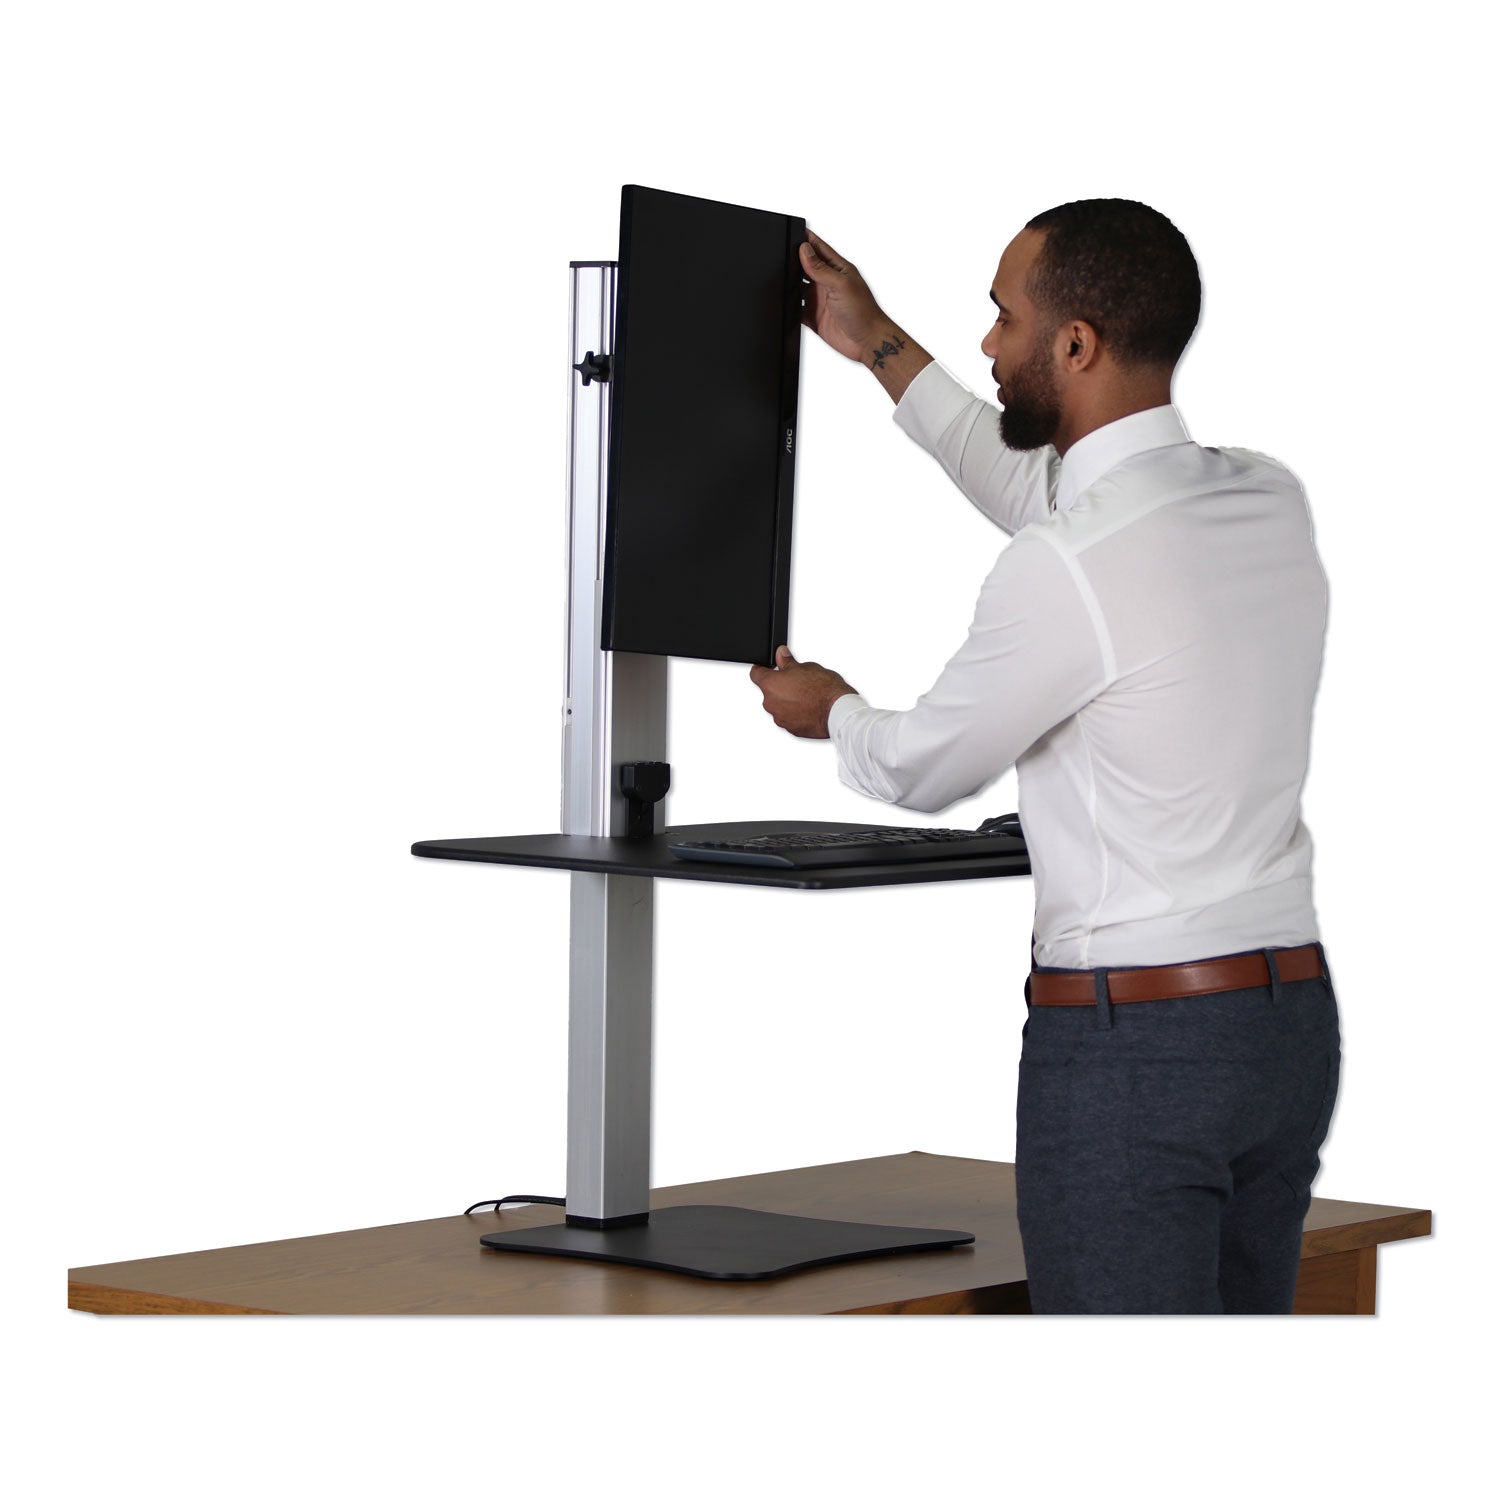 high-rise-electric-standing-desk-workstation-single-monitor-28-x-23-x-2025-black-aluminum-ships-in-1-3-business-days_vctdc400 - 3